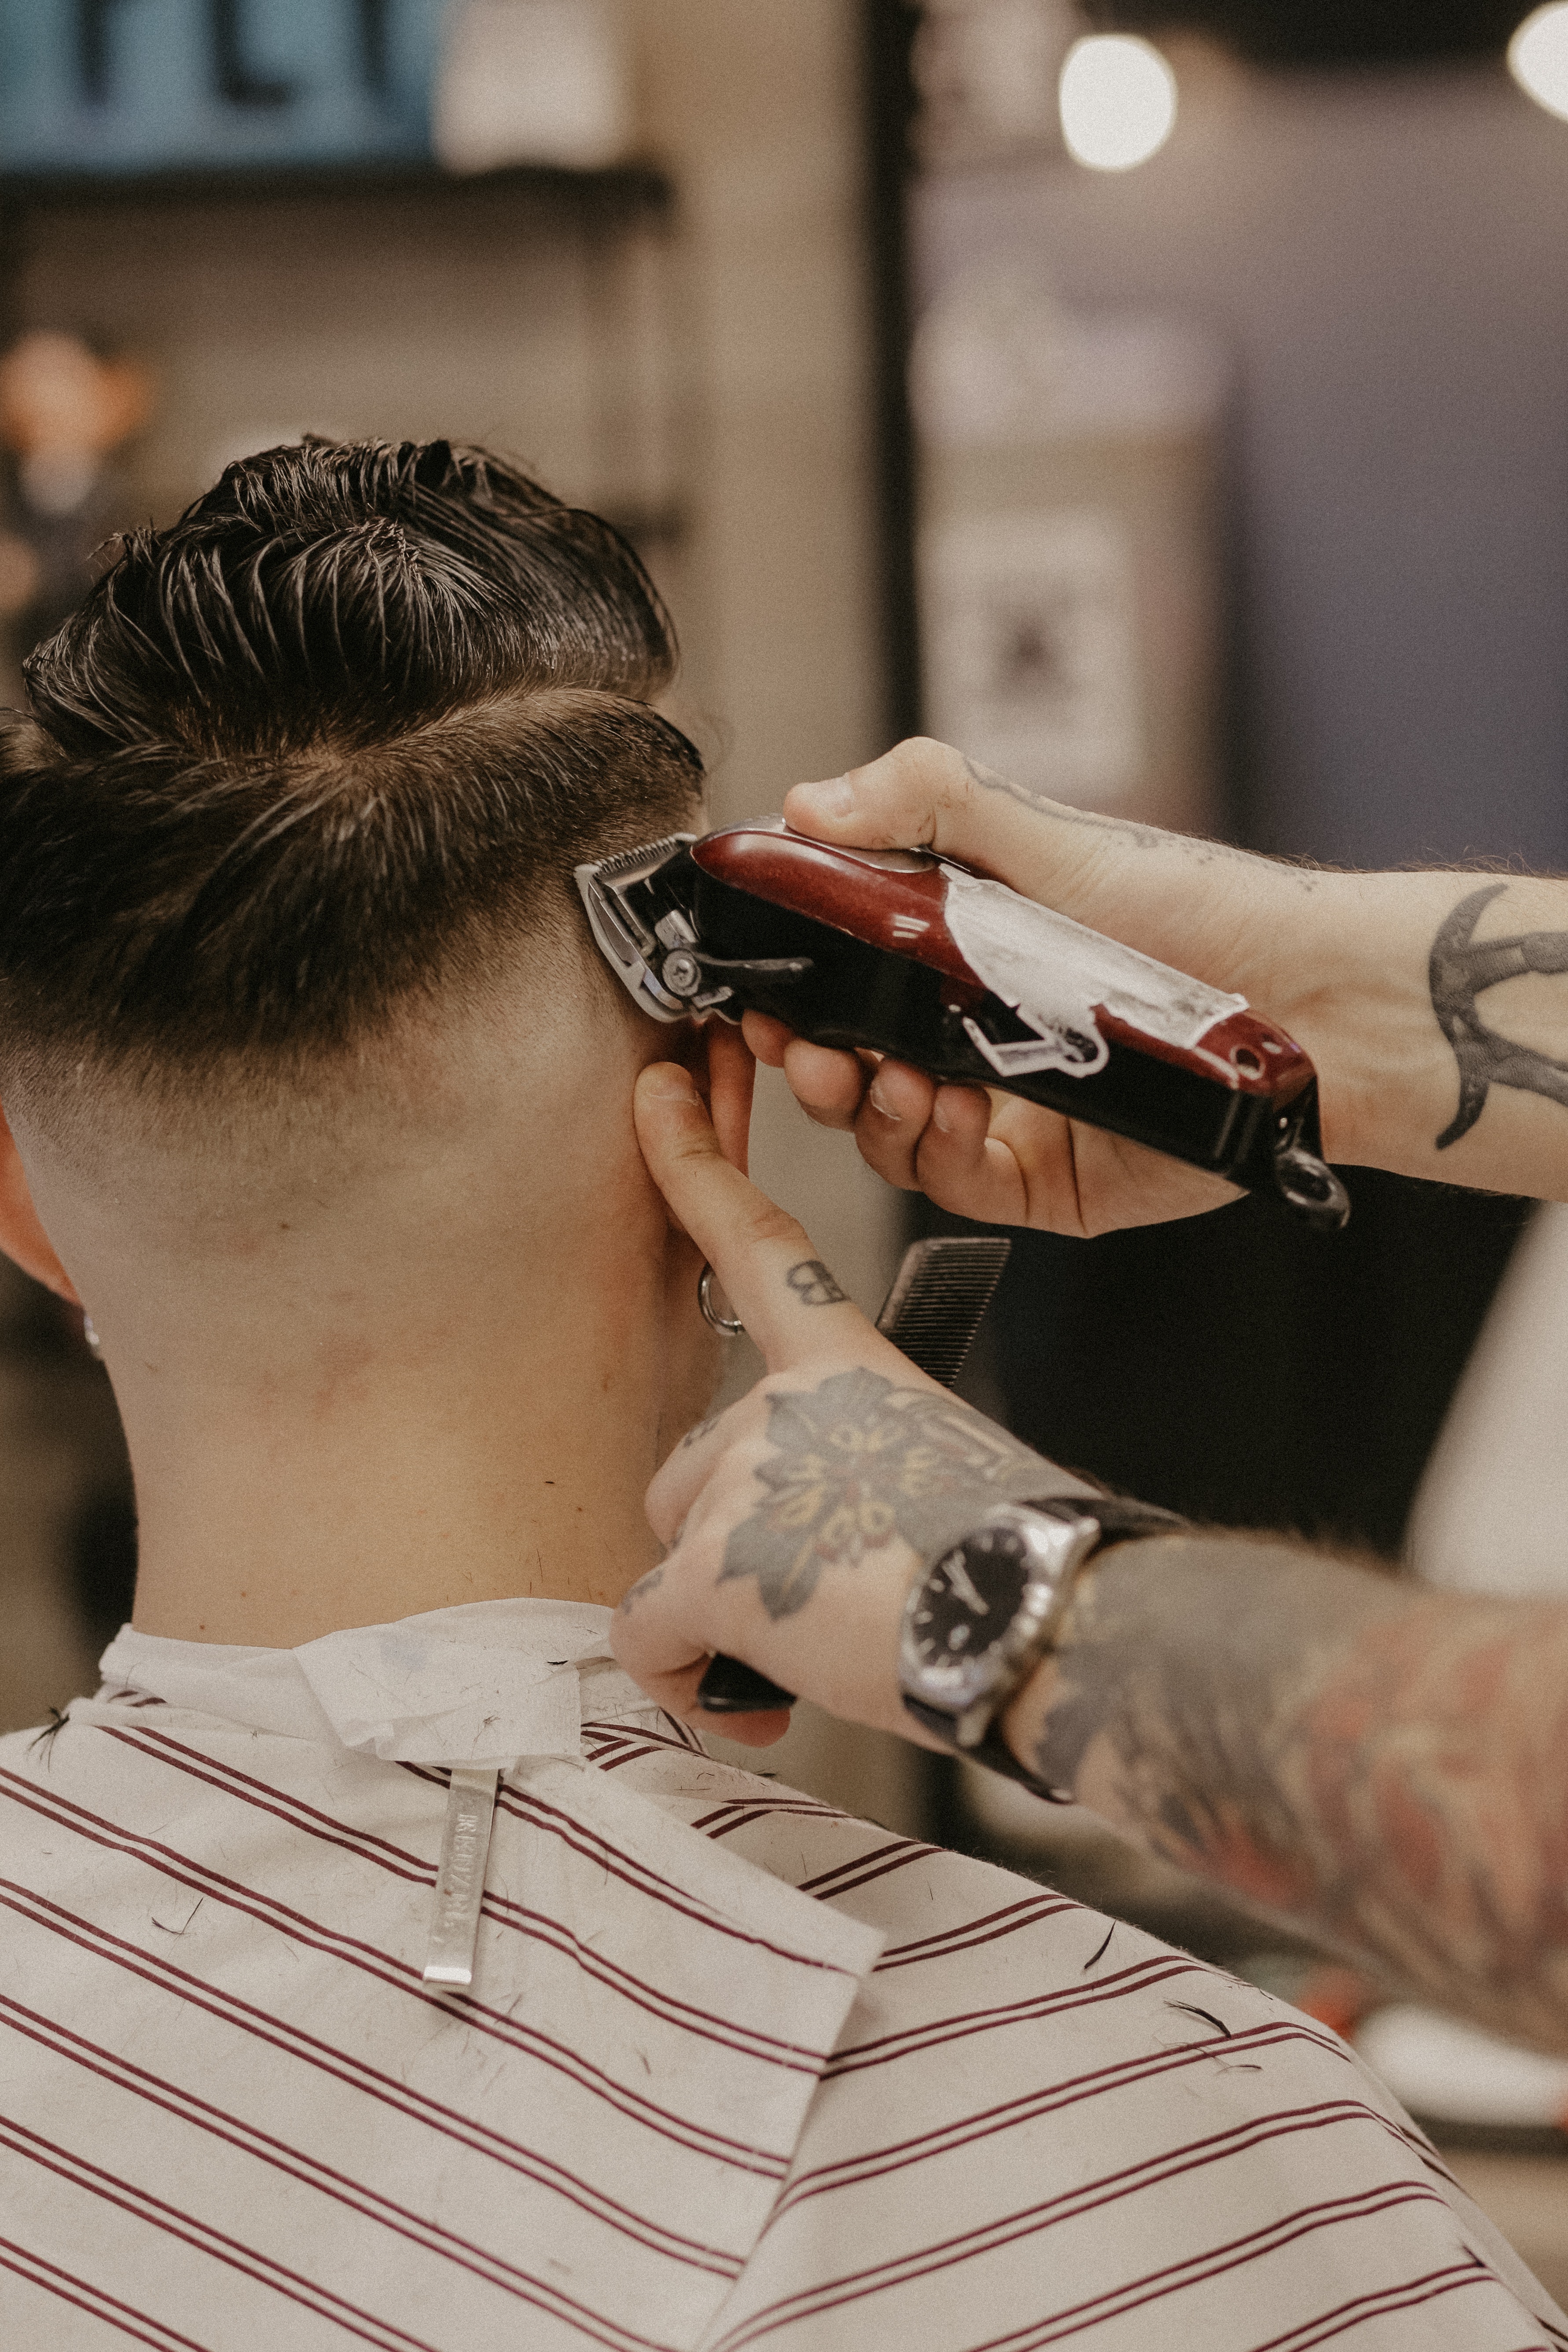 What British haircut is best for you?